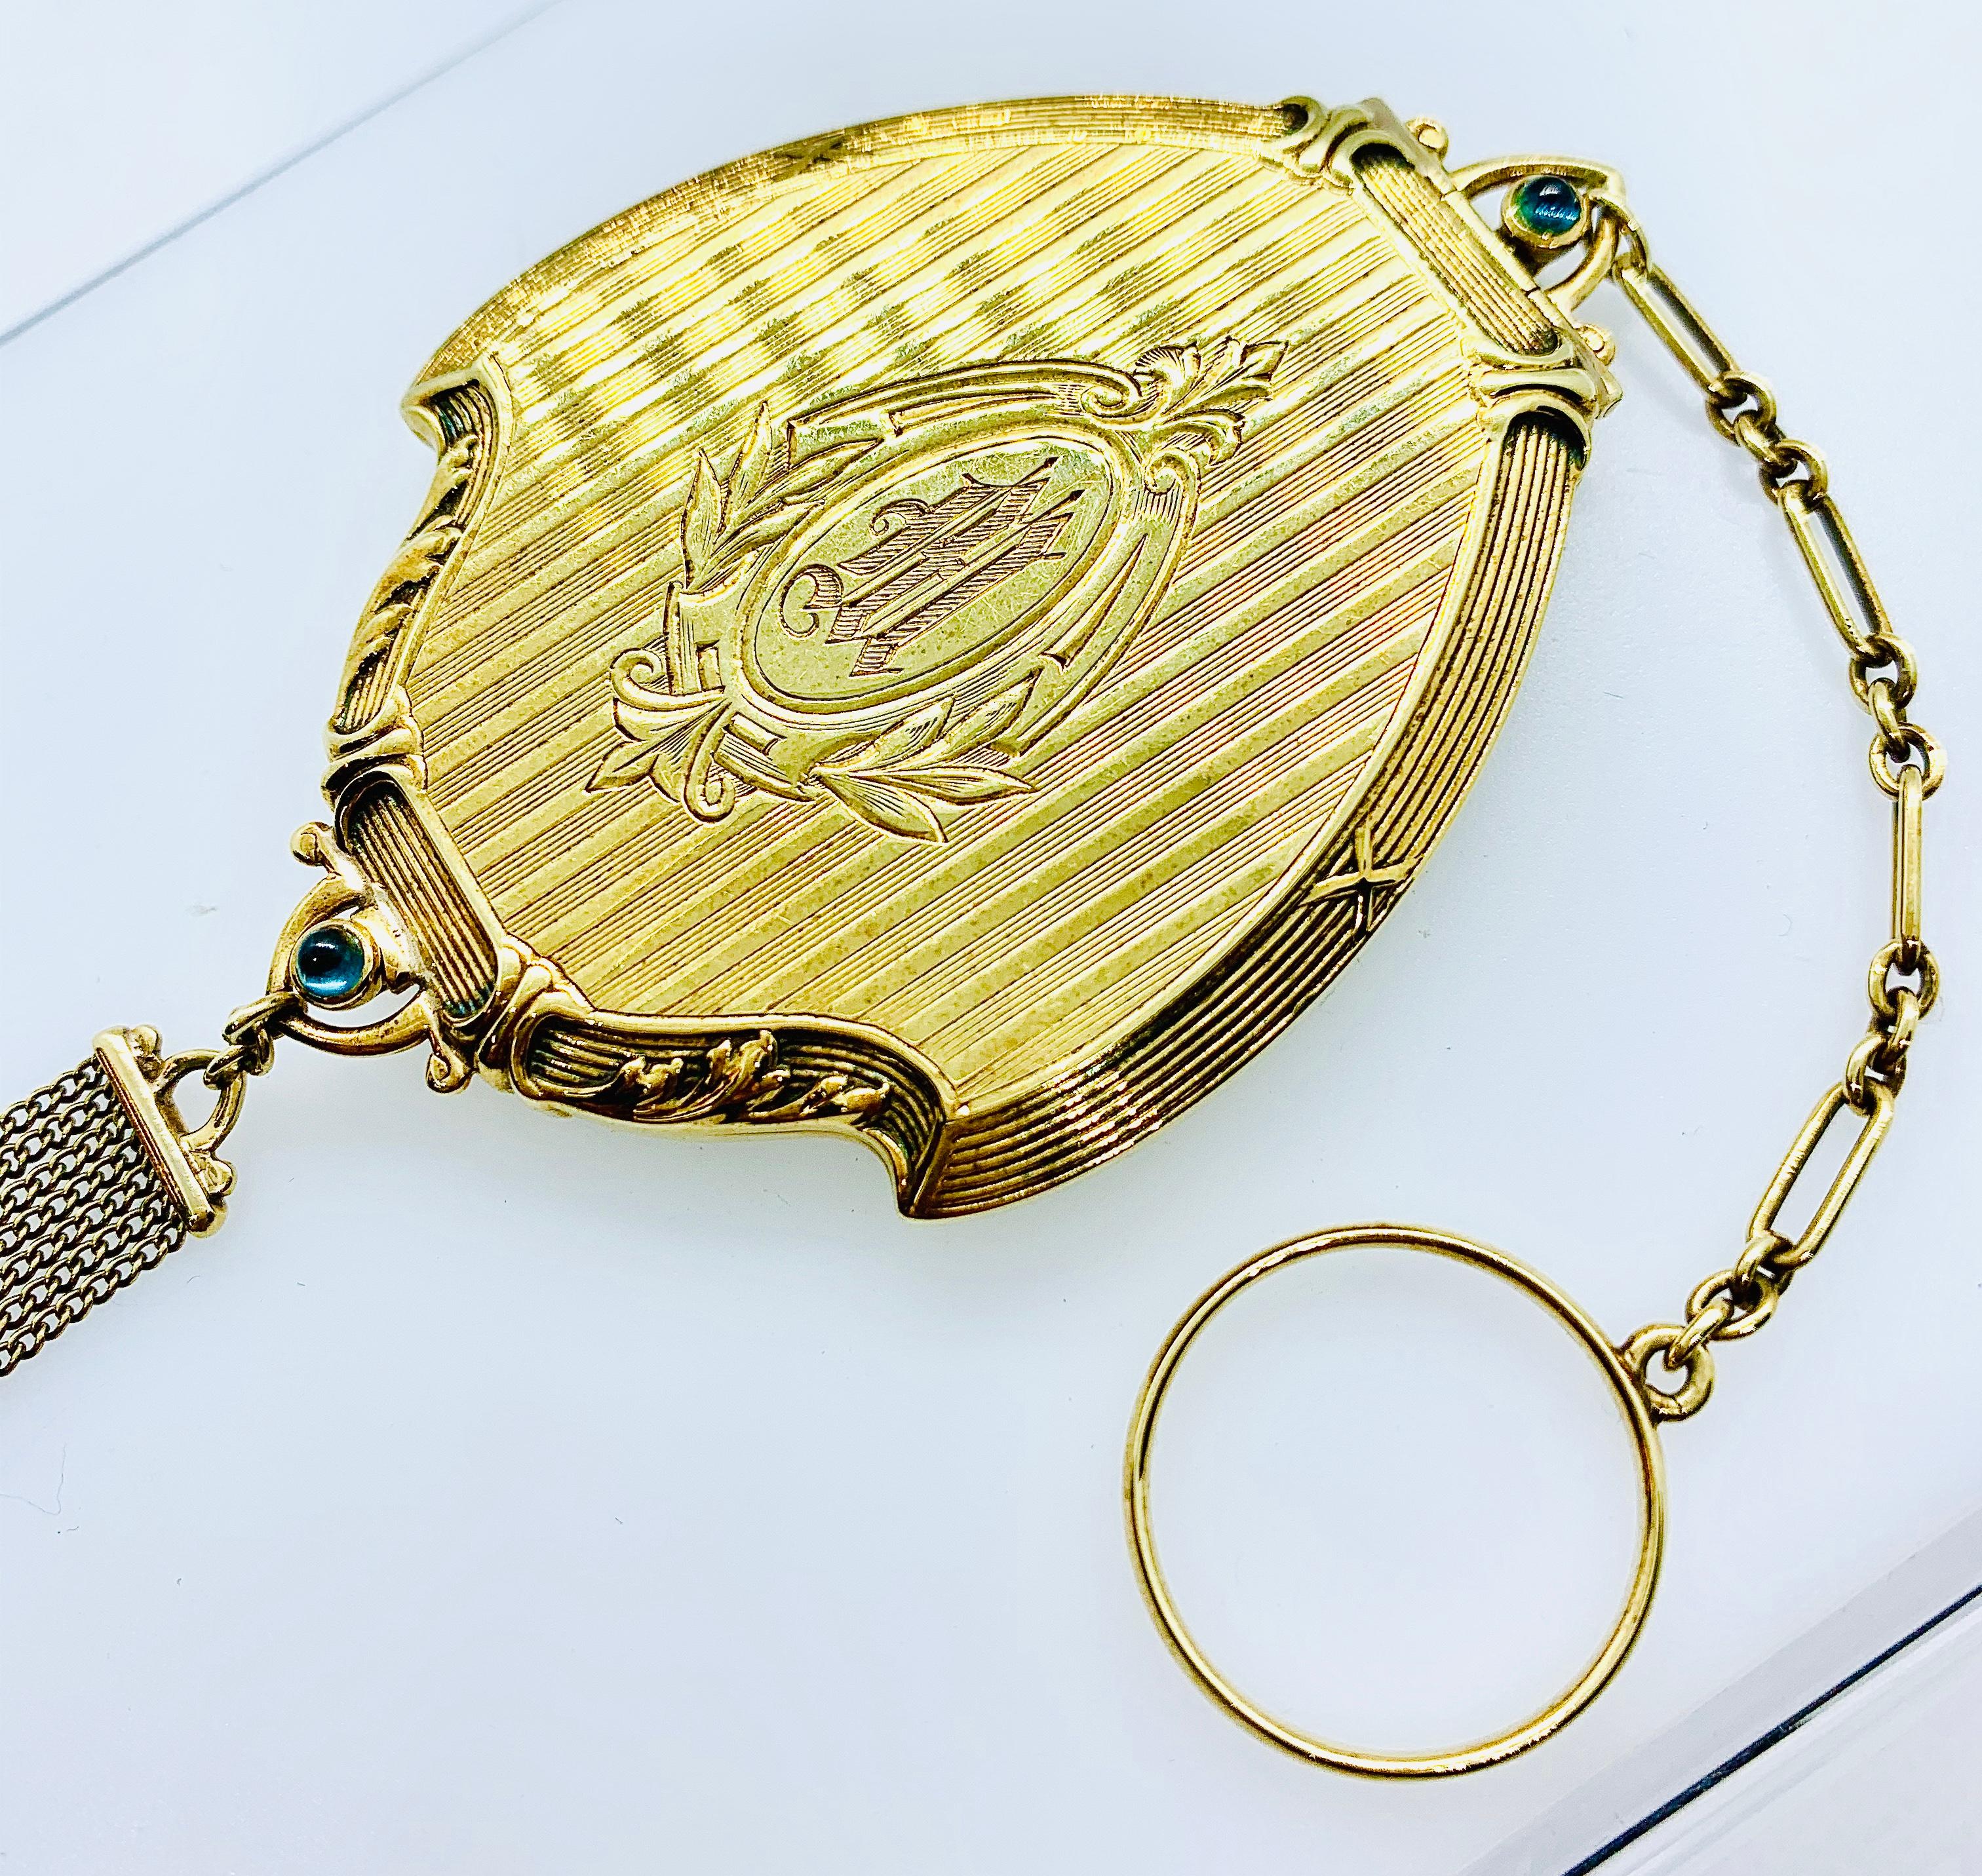 Gorgeous Antique ladies Compact with Mirror. This piece is made in 14K Yellow Gold and features a cabochon sapphire catch and pearl tassel. The piece is engraved not he front 